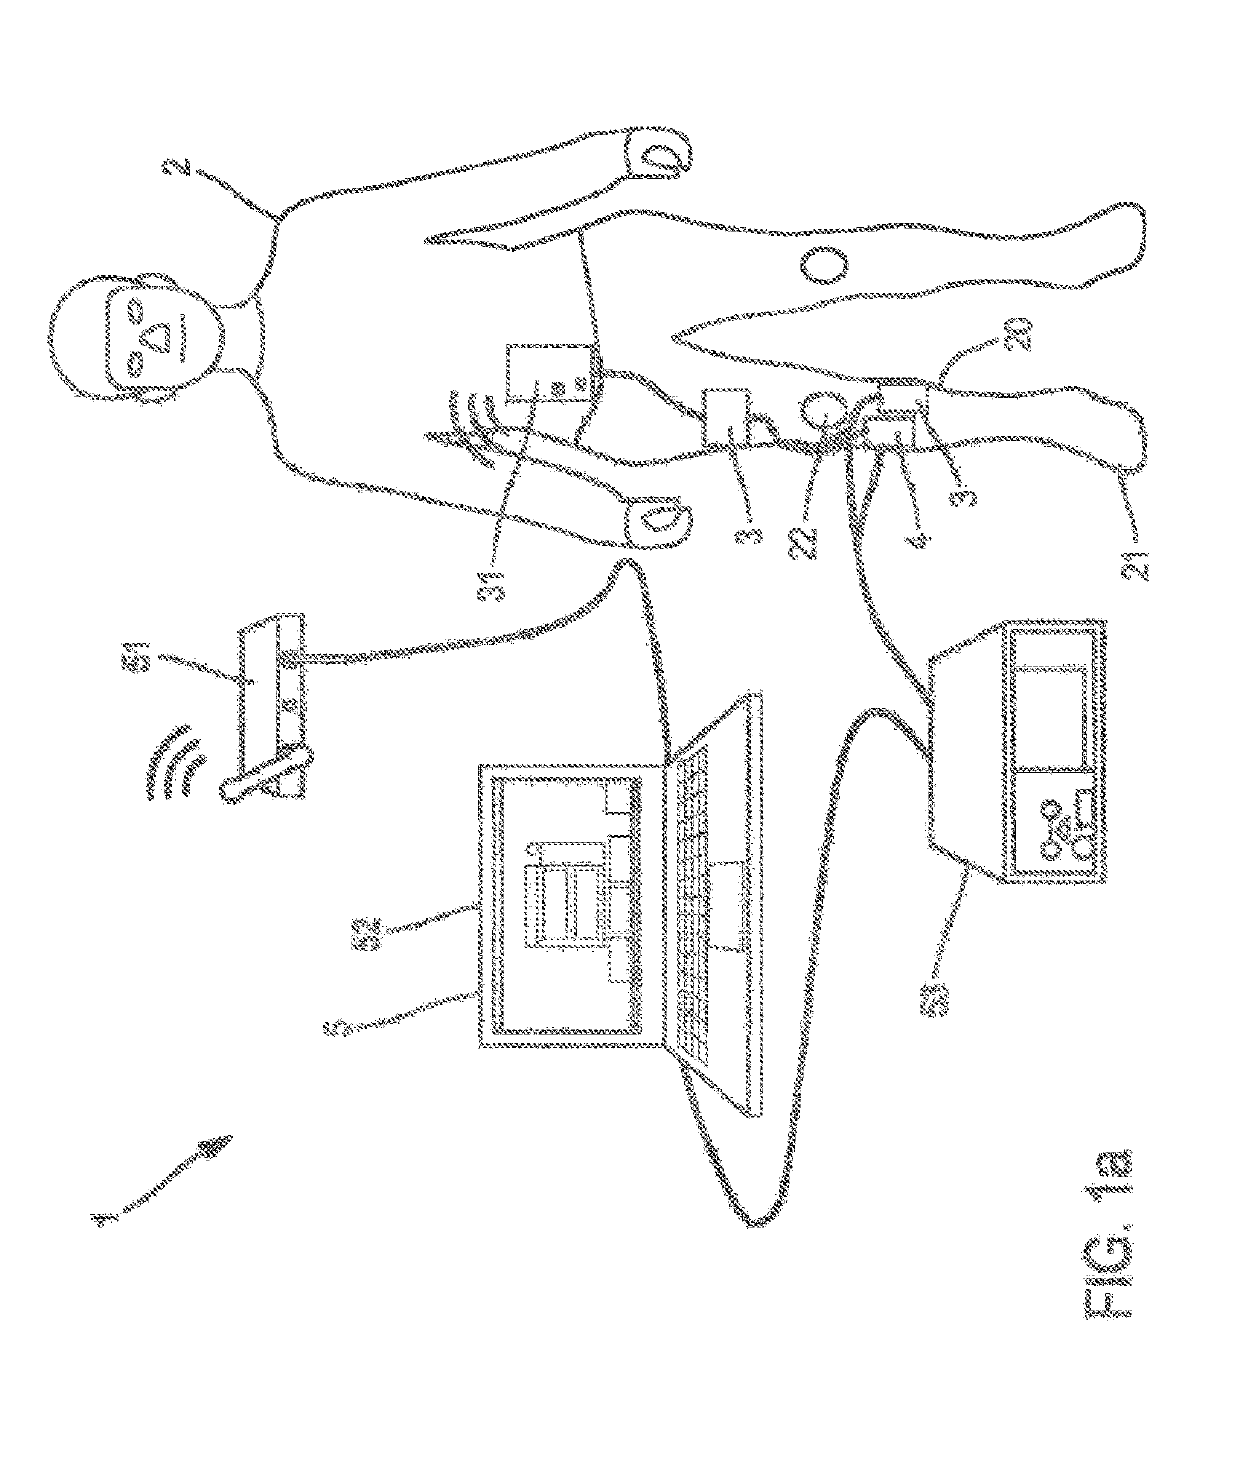 Stimulation Device For Activating At Least One Muscle Involved In Raising The Foot